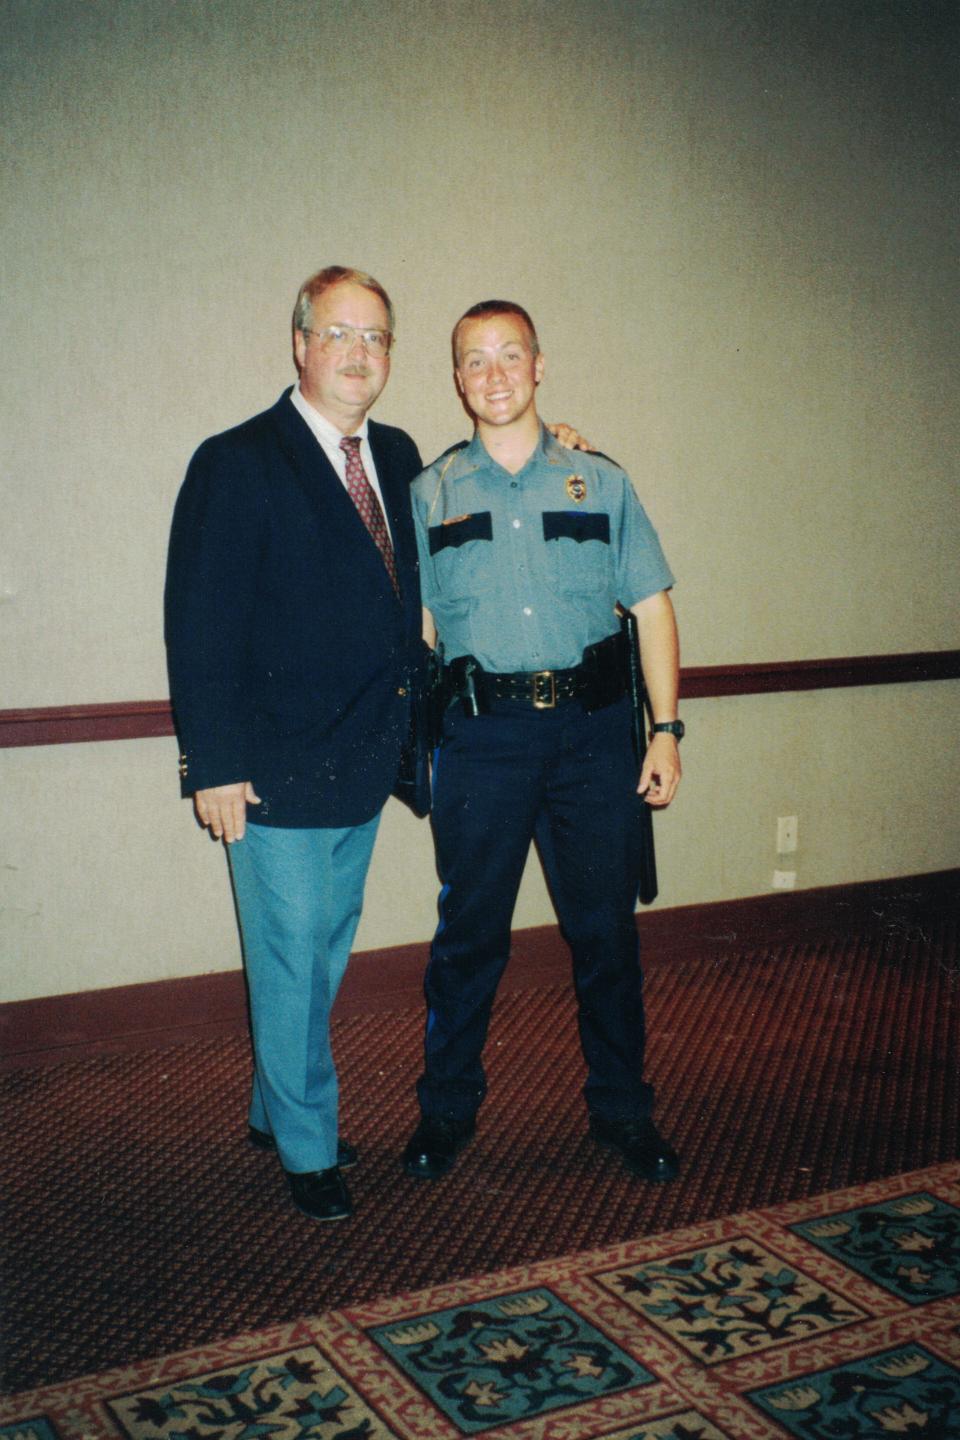 In this May 1998 family photo, Chris Mann, right, now the Democratic nominee for Kansas attorney general, stands with his father, left, in his new Lawrence police uniform, in Lawrence, Kansas. Mann would later be injured on duty and forced to give up his career as an officer before becoming a lawyer, a prosecutor in Kansas City, Kansas, and a national board member for Mothers Against Drunk Driving. (Chris Mann via AP)